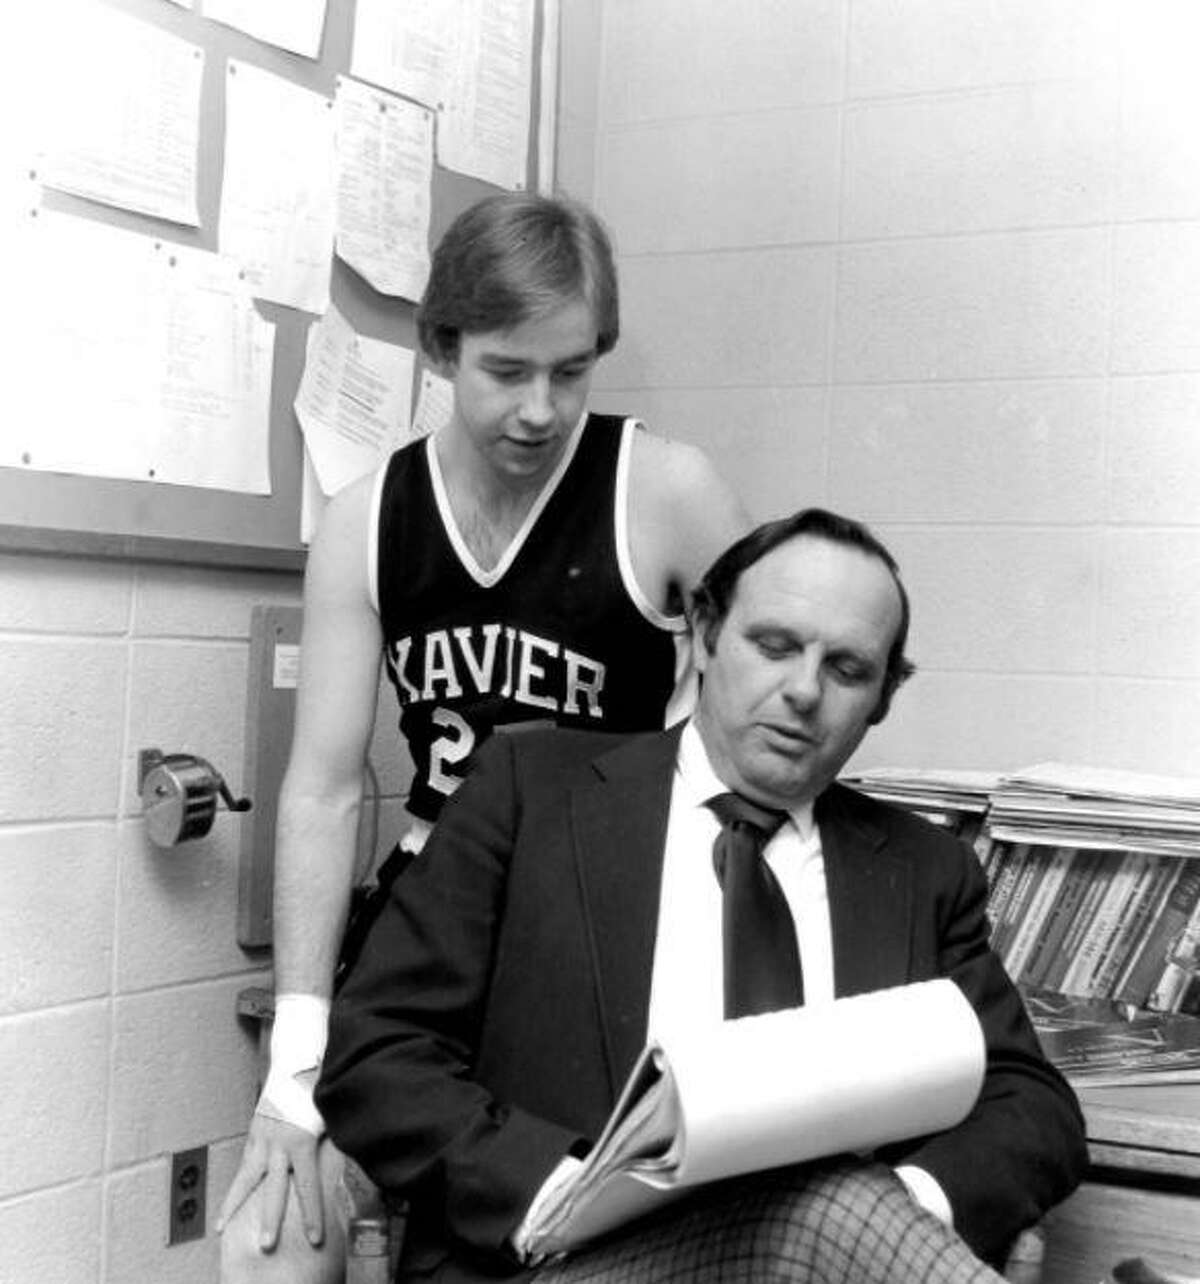 Art Kohs, who crafted the Xavier athletics program from the time the school was opened in 1963, died Sunday. He was 84.